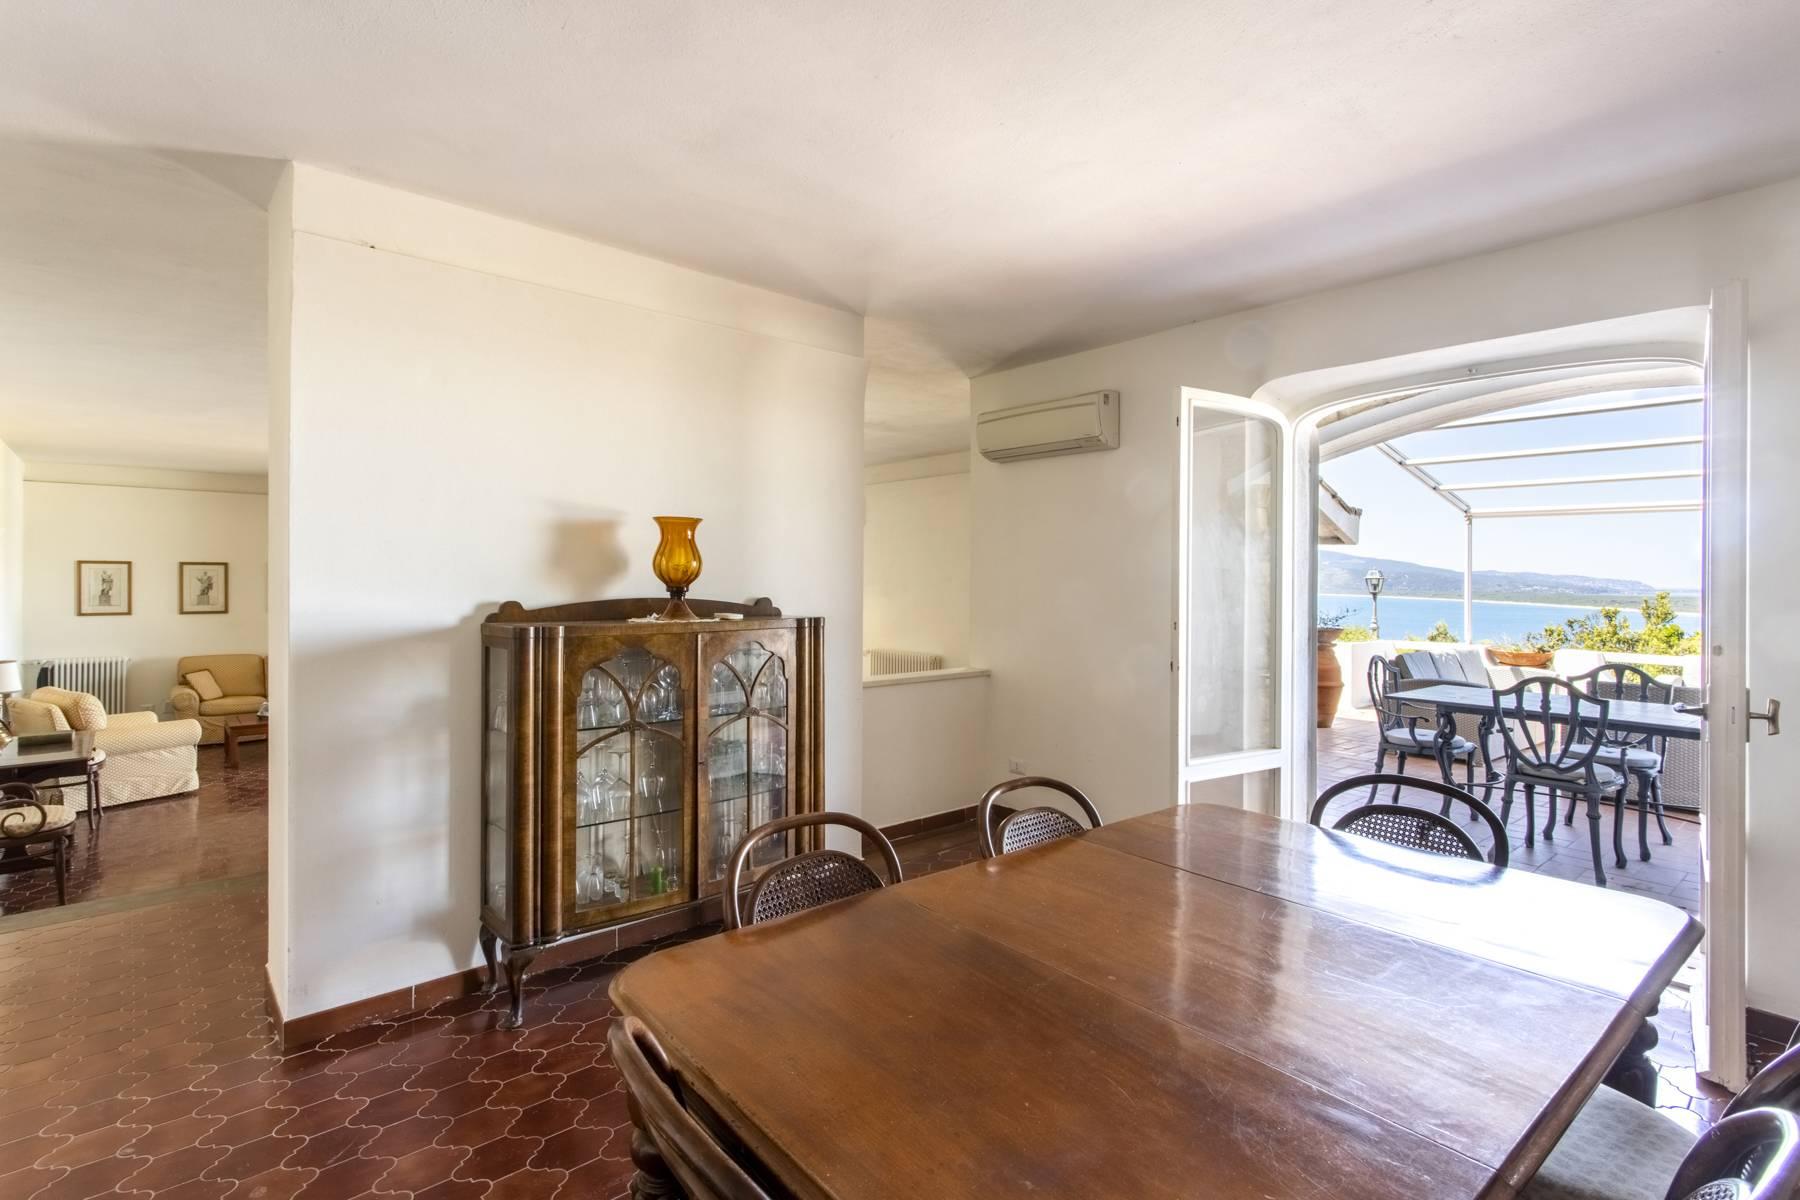 Stunning villa in Ansedonia with an incomparable view - 5